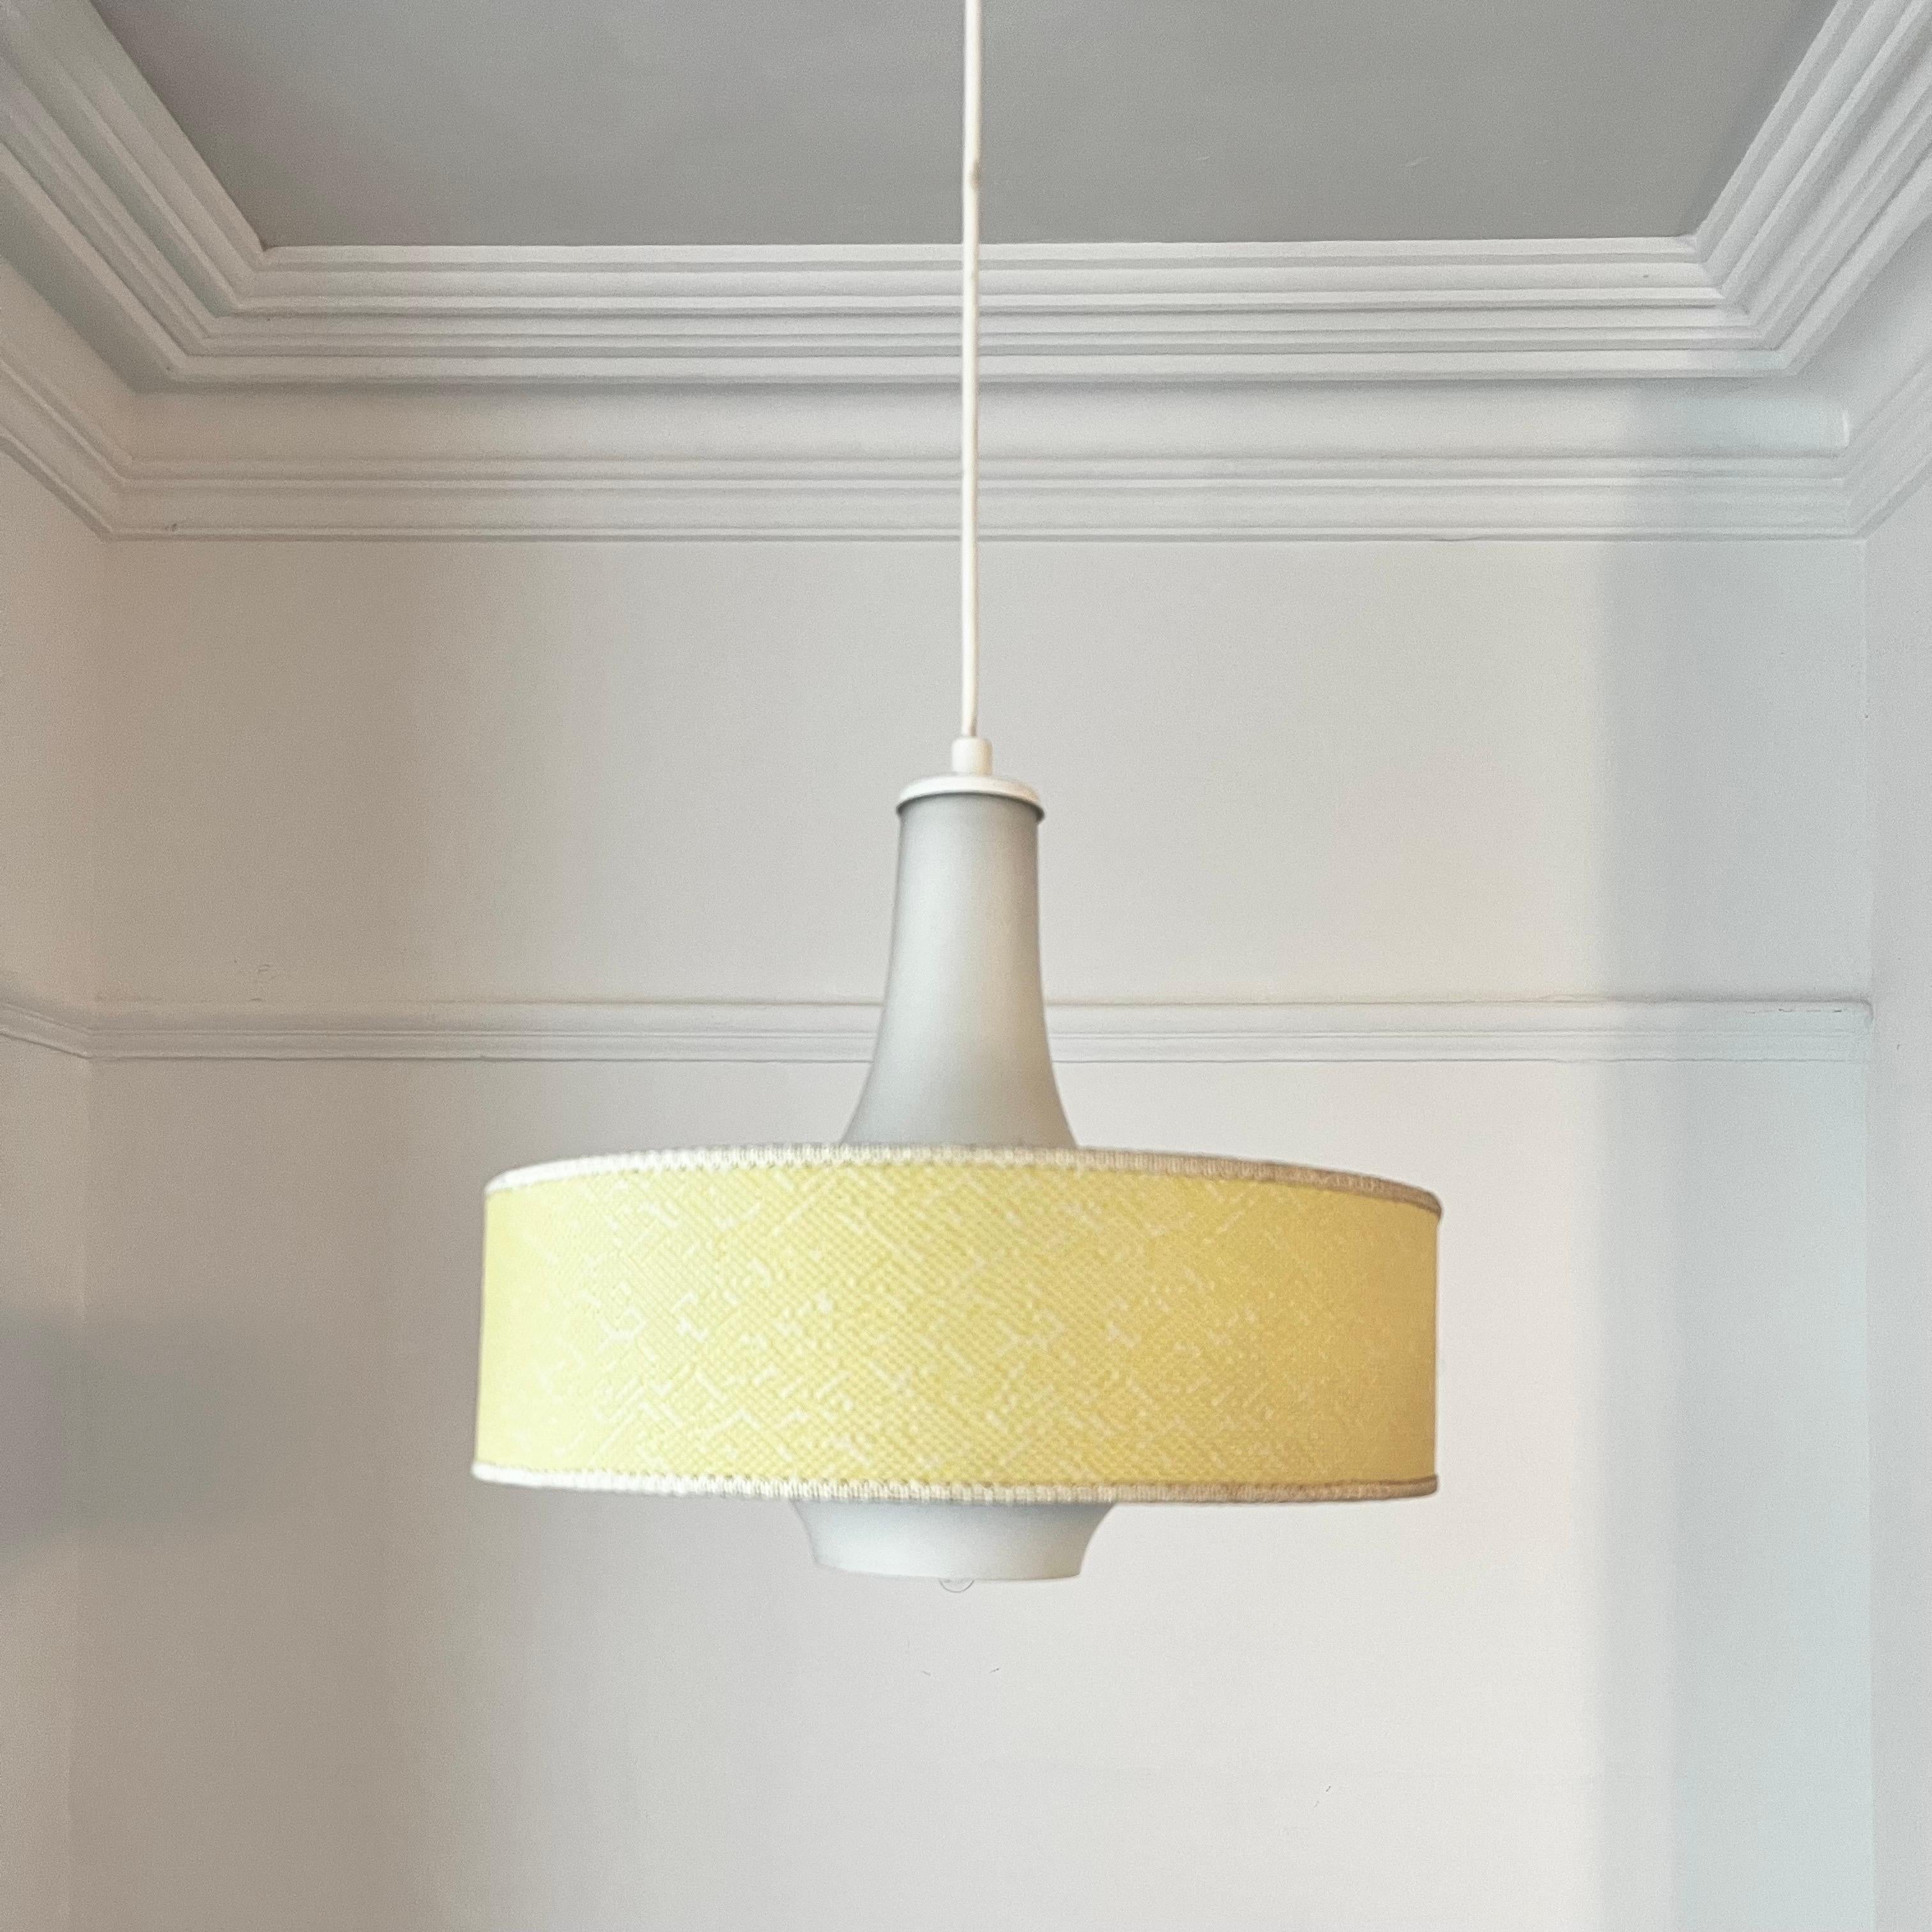 A simple glass pendant light, with an optional lemon-yellow outer shade by Itsu or Finland. Mid-20th century. Labelled. A similar model shown in the Itsu catalogue dated 1963.

The light is made up of an onion-shaped glass body, which carries a